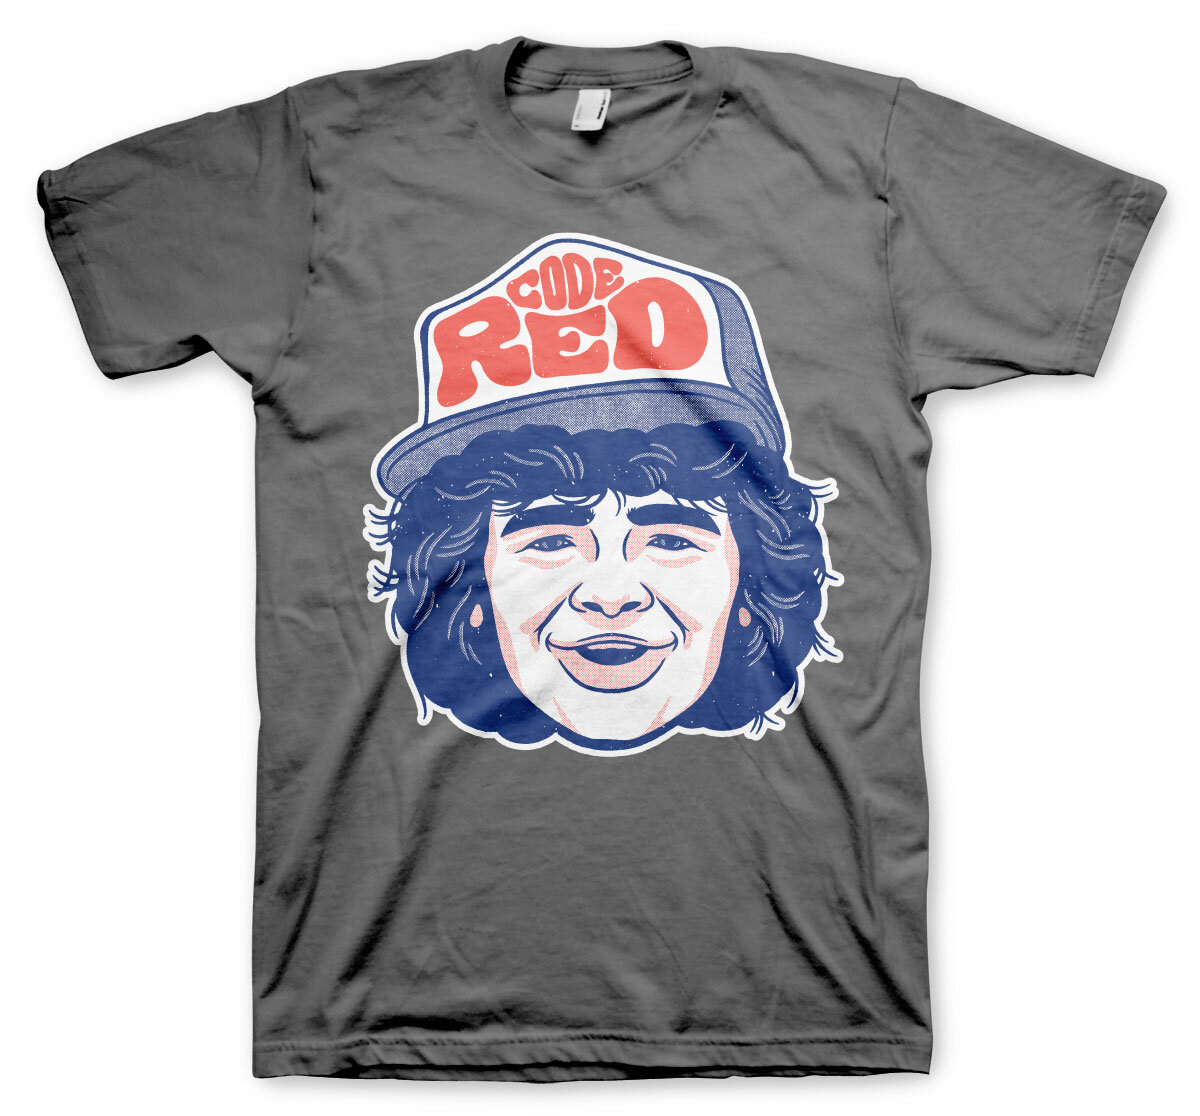 Dustin Code Red T-Shirt